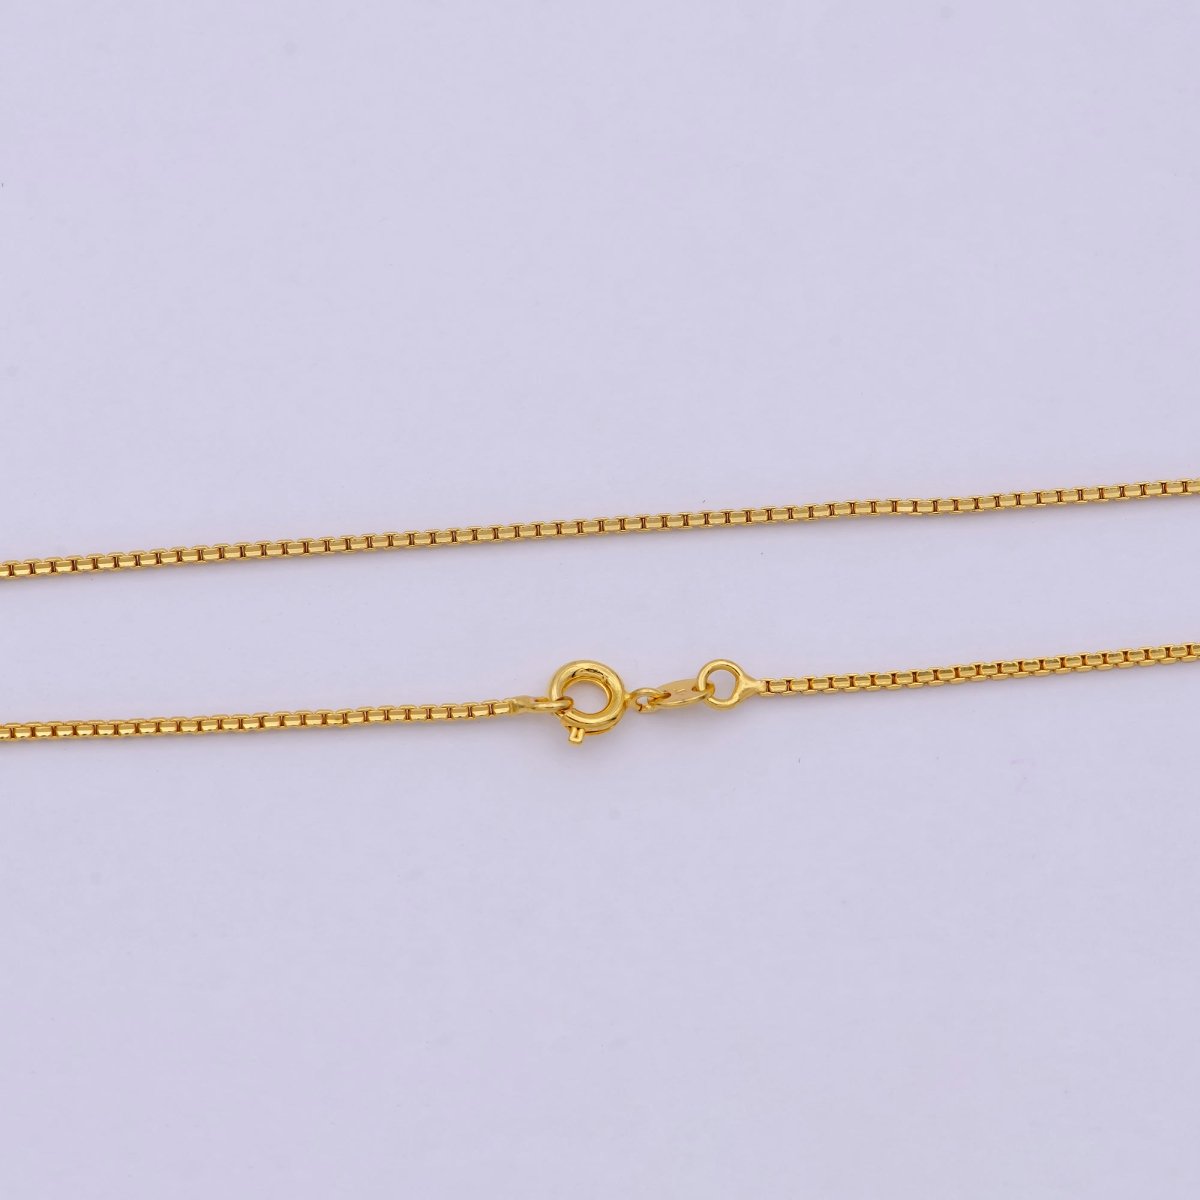 24k Gold Filled Box Chain Necklace, 18 Inch, 1mm Gold Chain, Box Link Chain For Women Men | WA-530 Clearance Pricing - DLUXCA